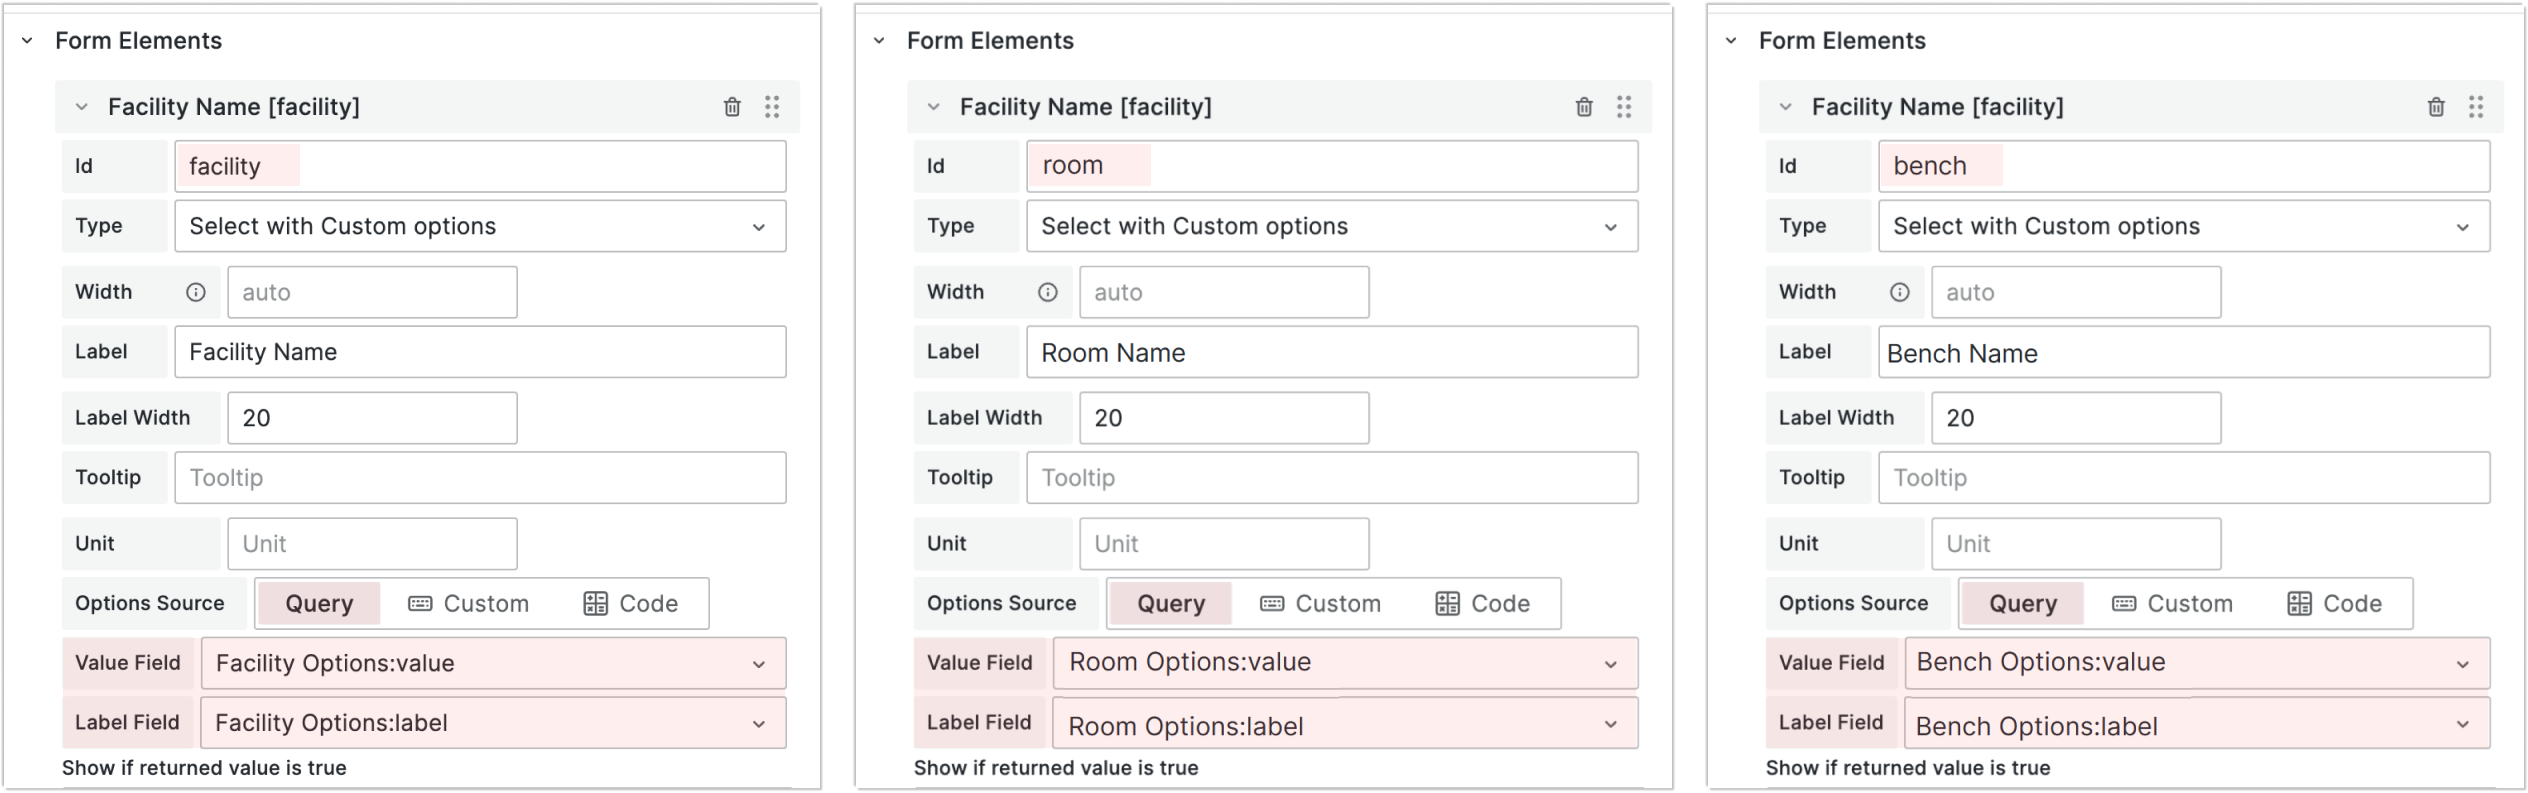 Set 'Option Source' to 'Query' and specify Value and Label Fields for each form element.